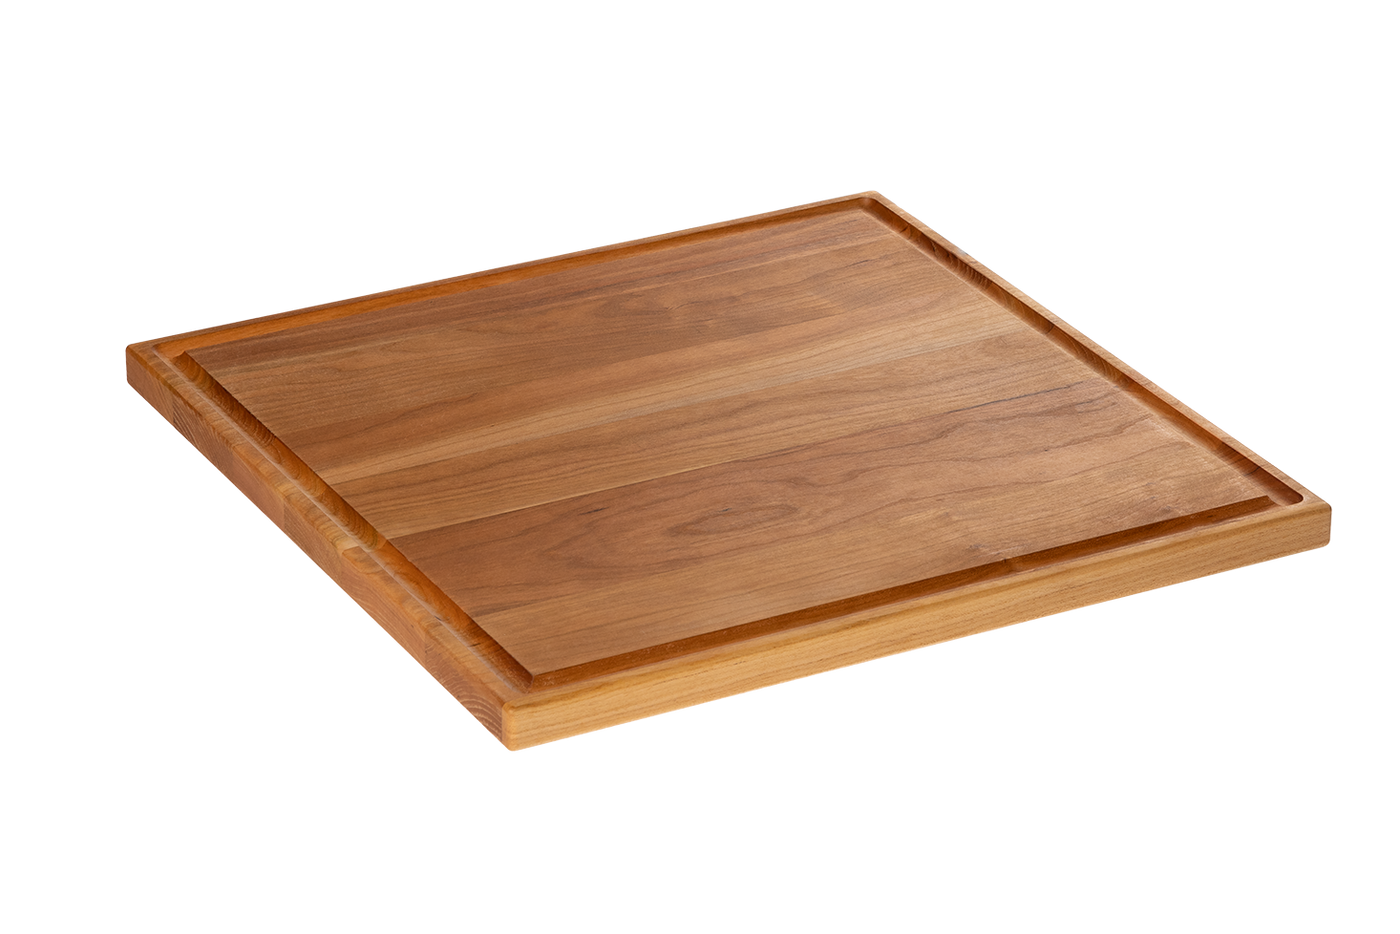 Cherry - SQG14 - Square Cutting Board with Juice Groove 14-1/4''x14-1/4''x3/4''